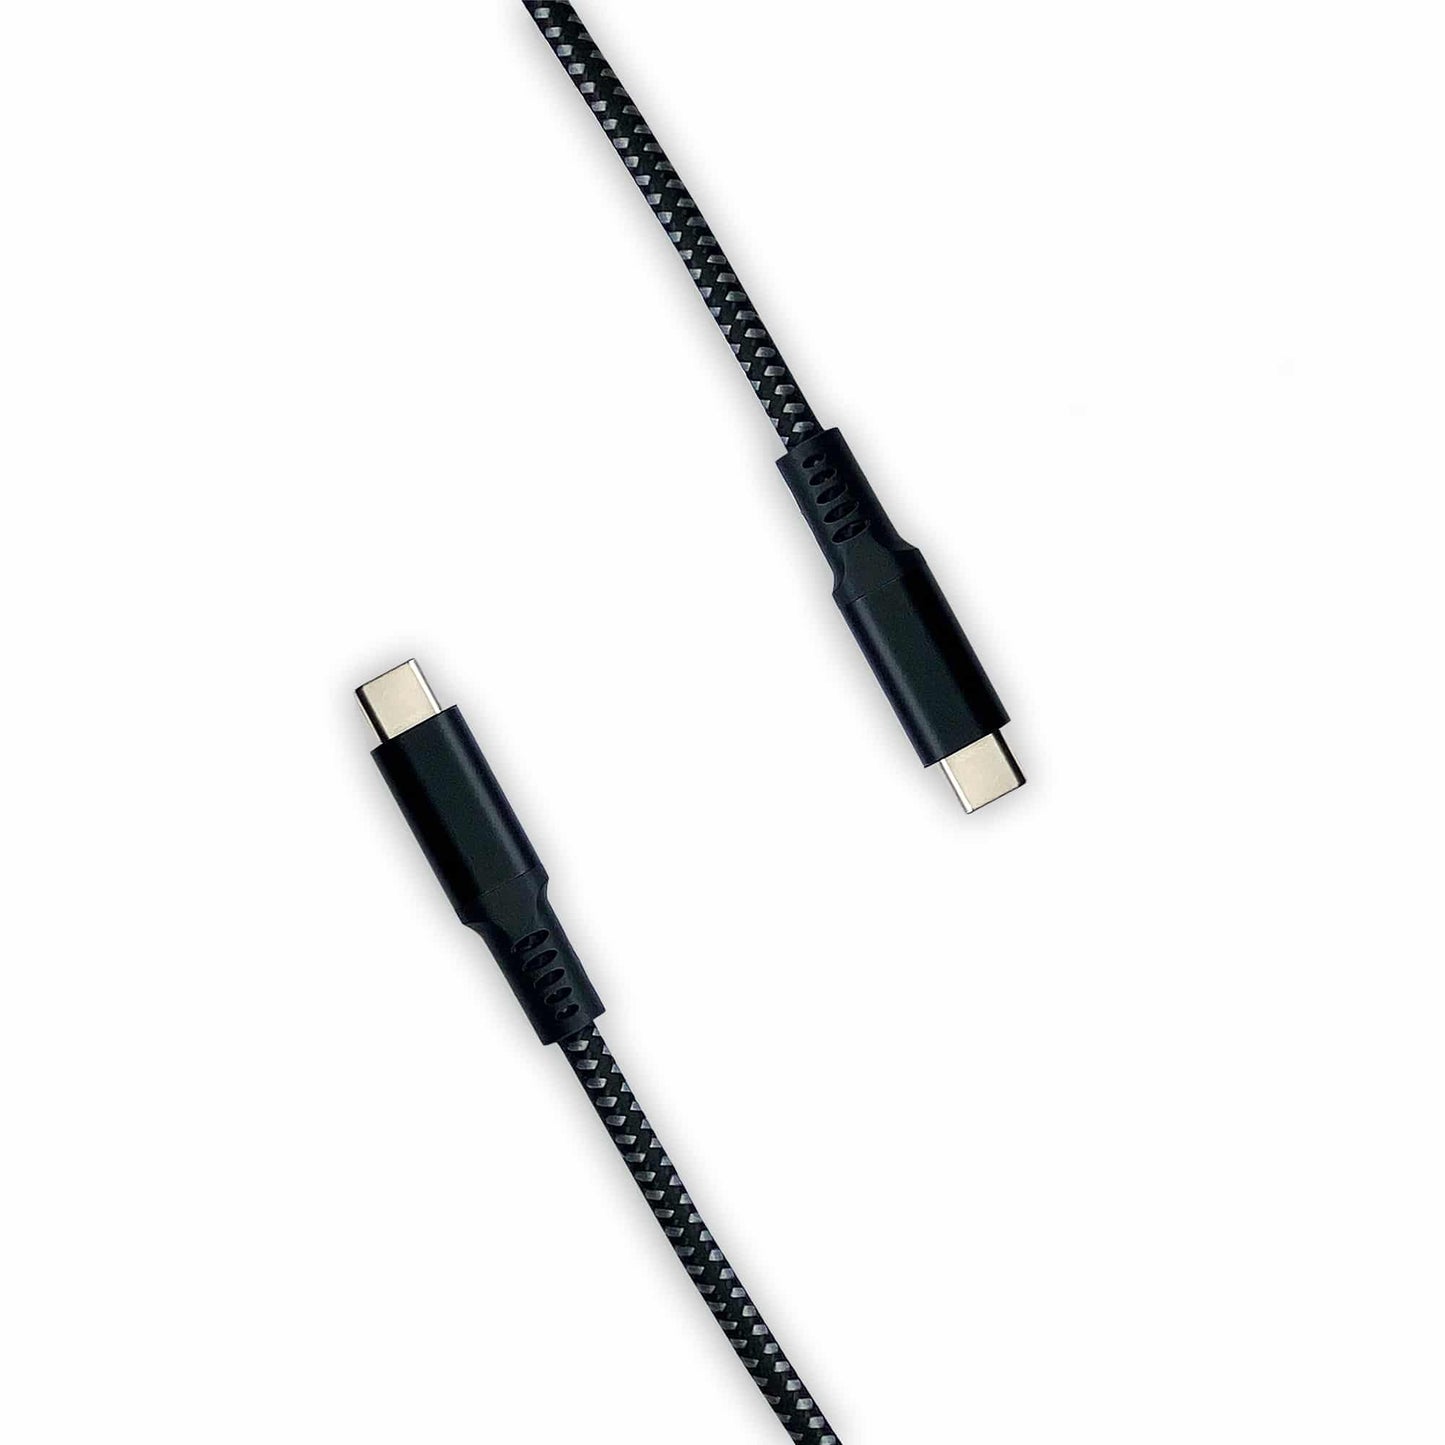 2x MOJOGEAR USB-C to USB-C cable 1.5 or 3 meters Extra Strong [DUOPACK]